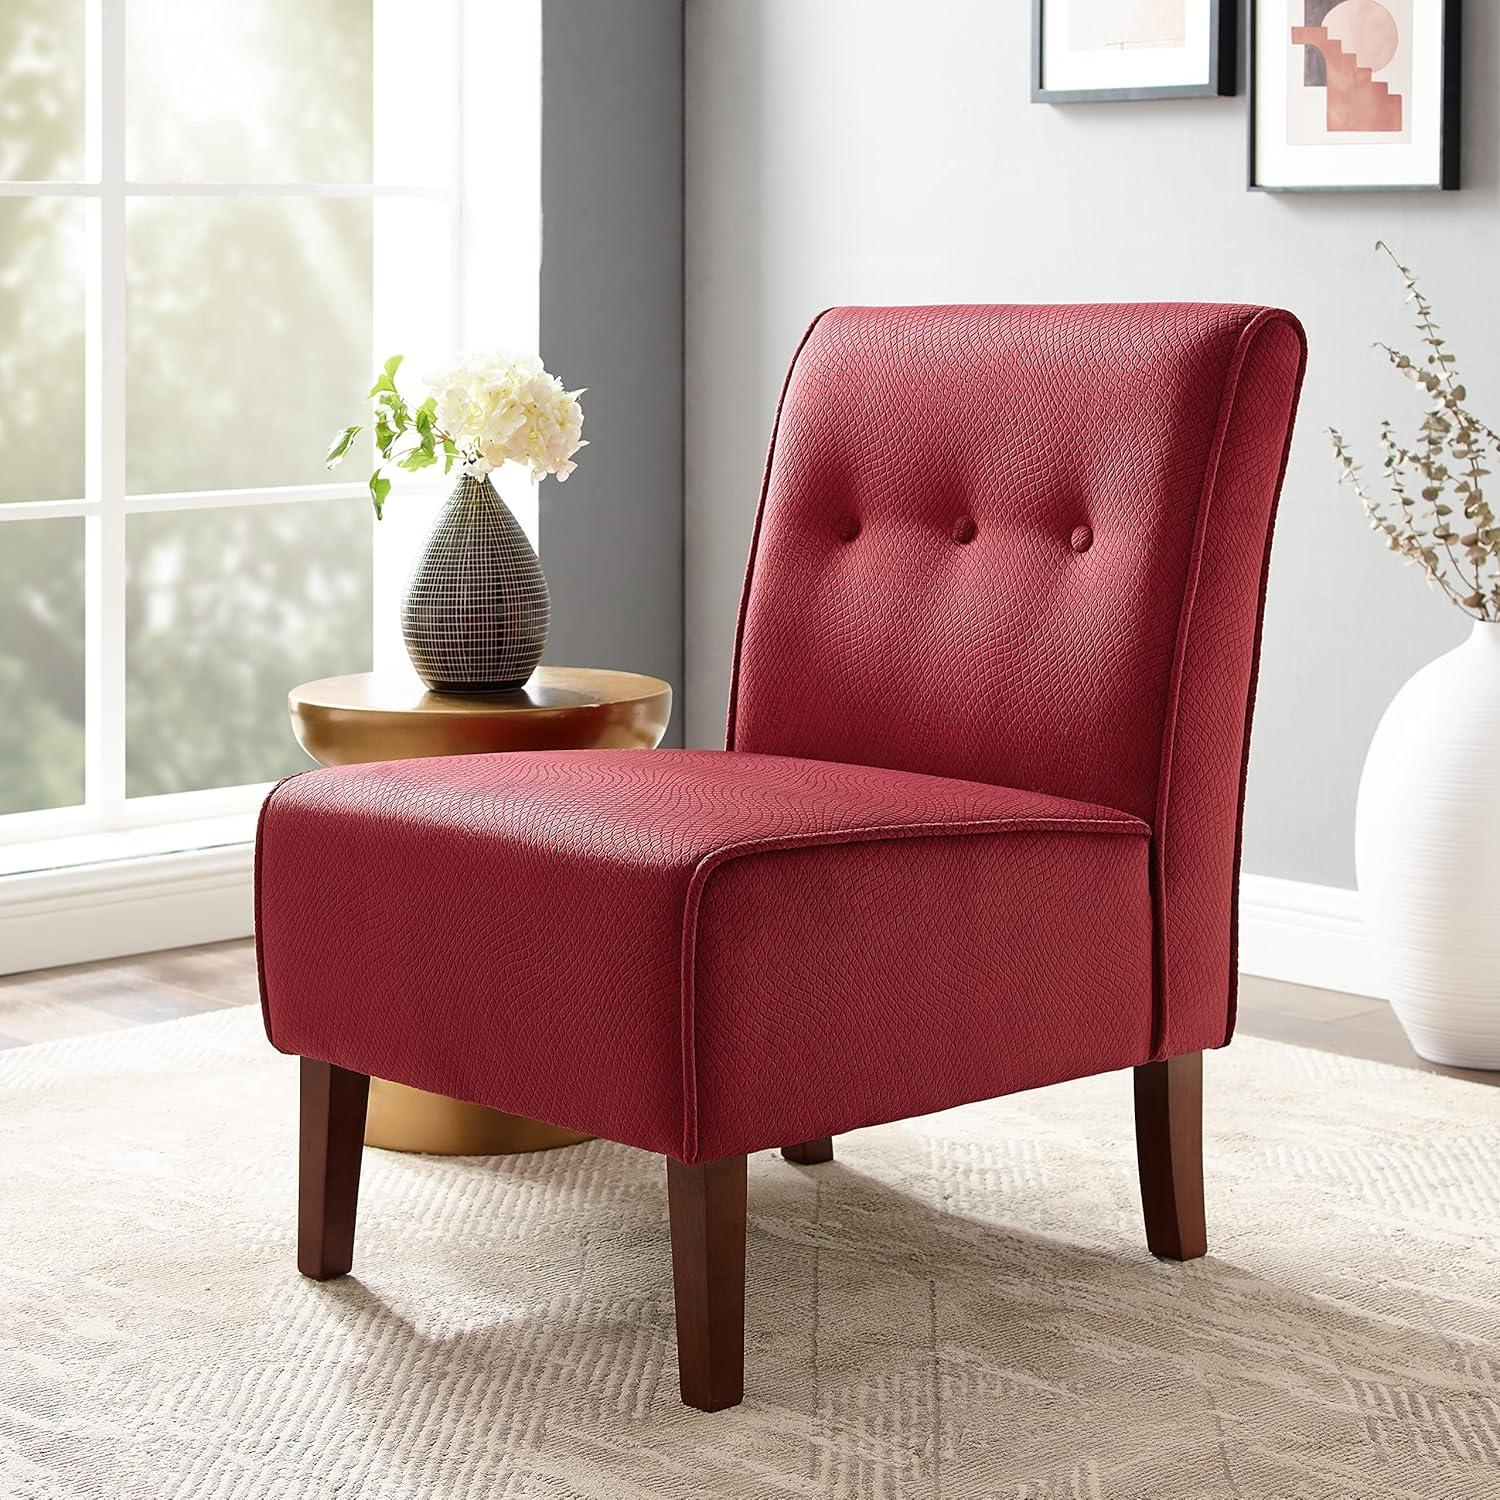 Elegant Coco Slipper Accent Chair in Luxurious Red with Sturdy Wood Frame